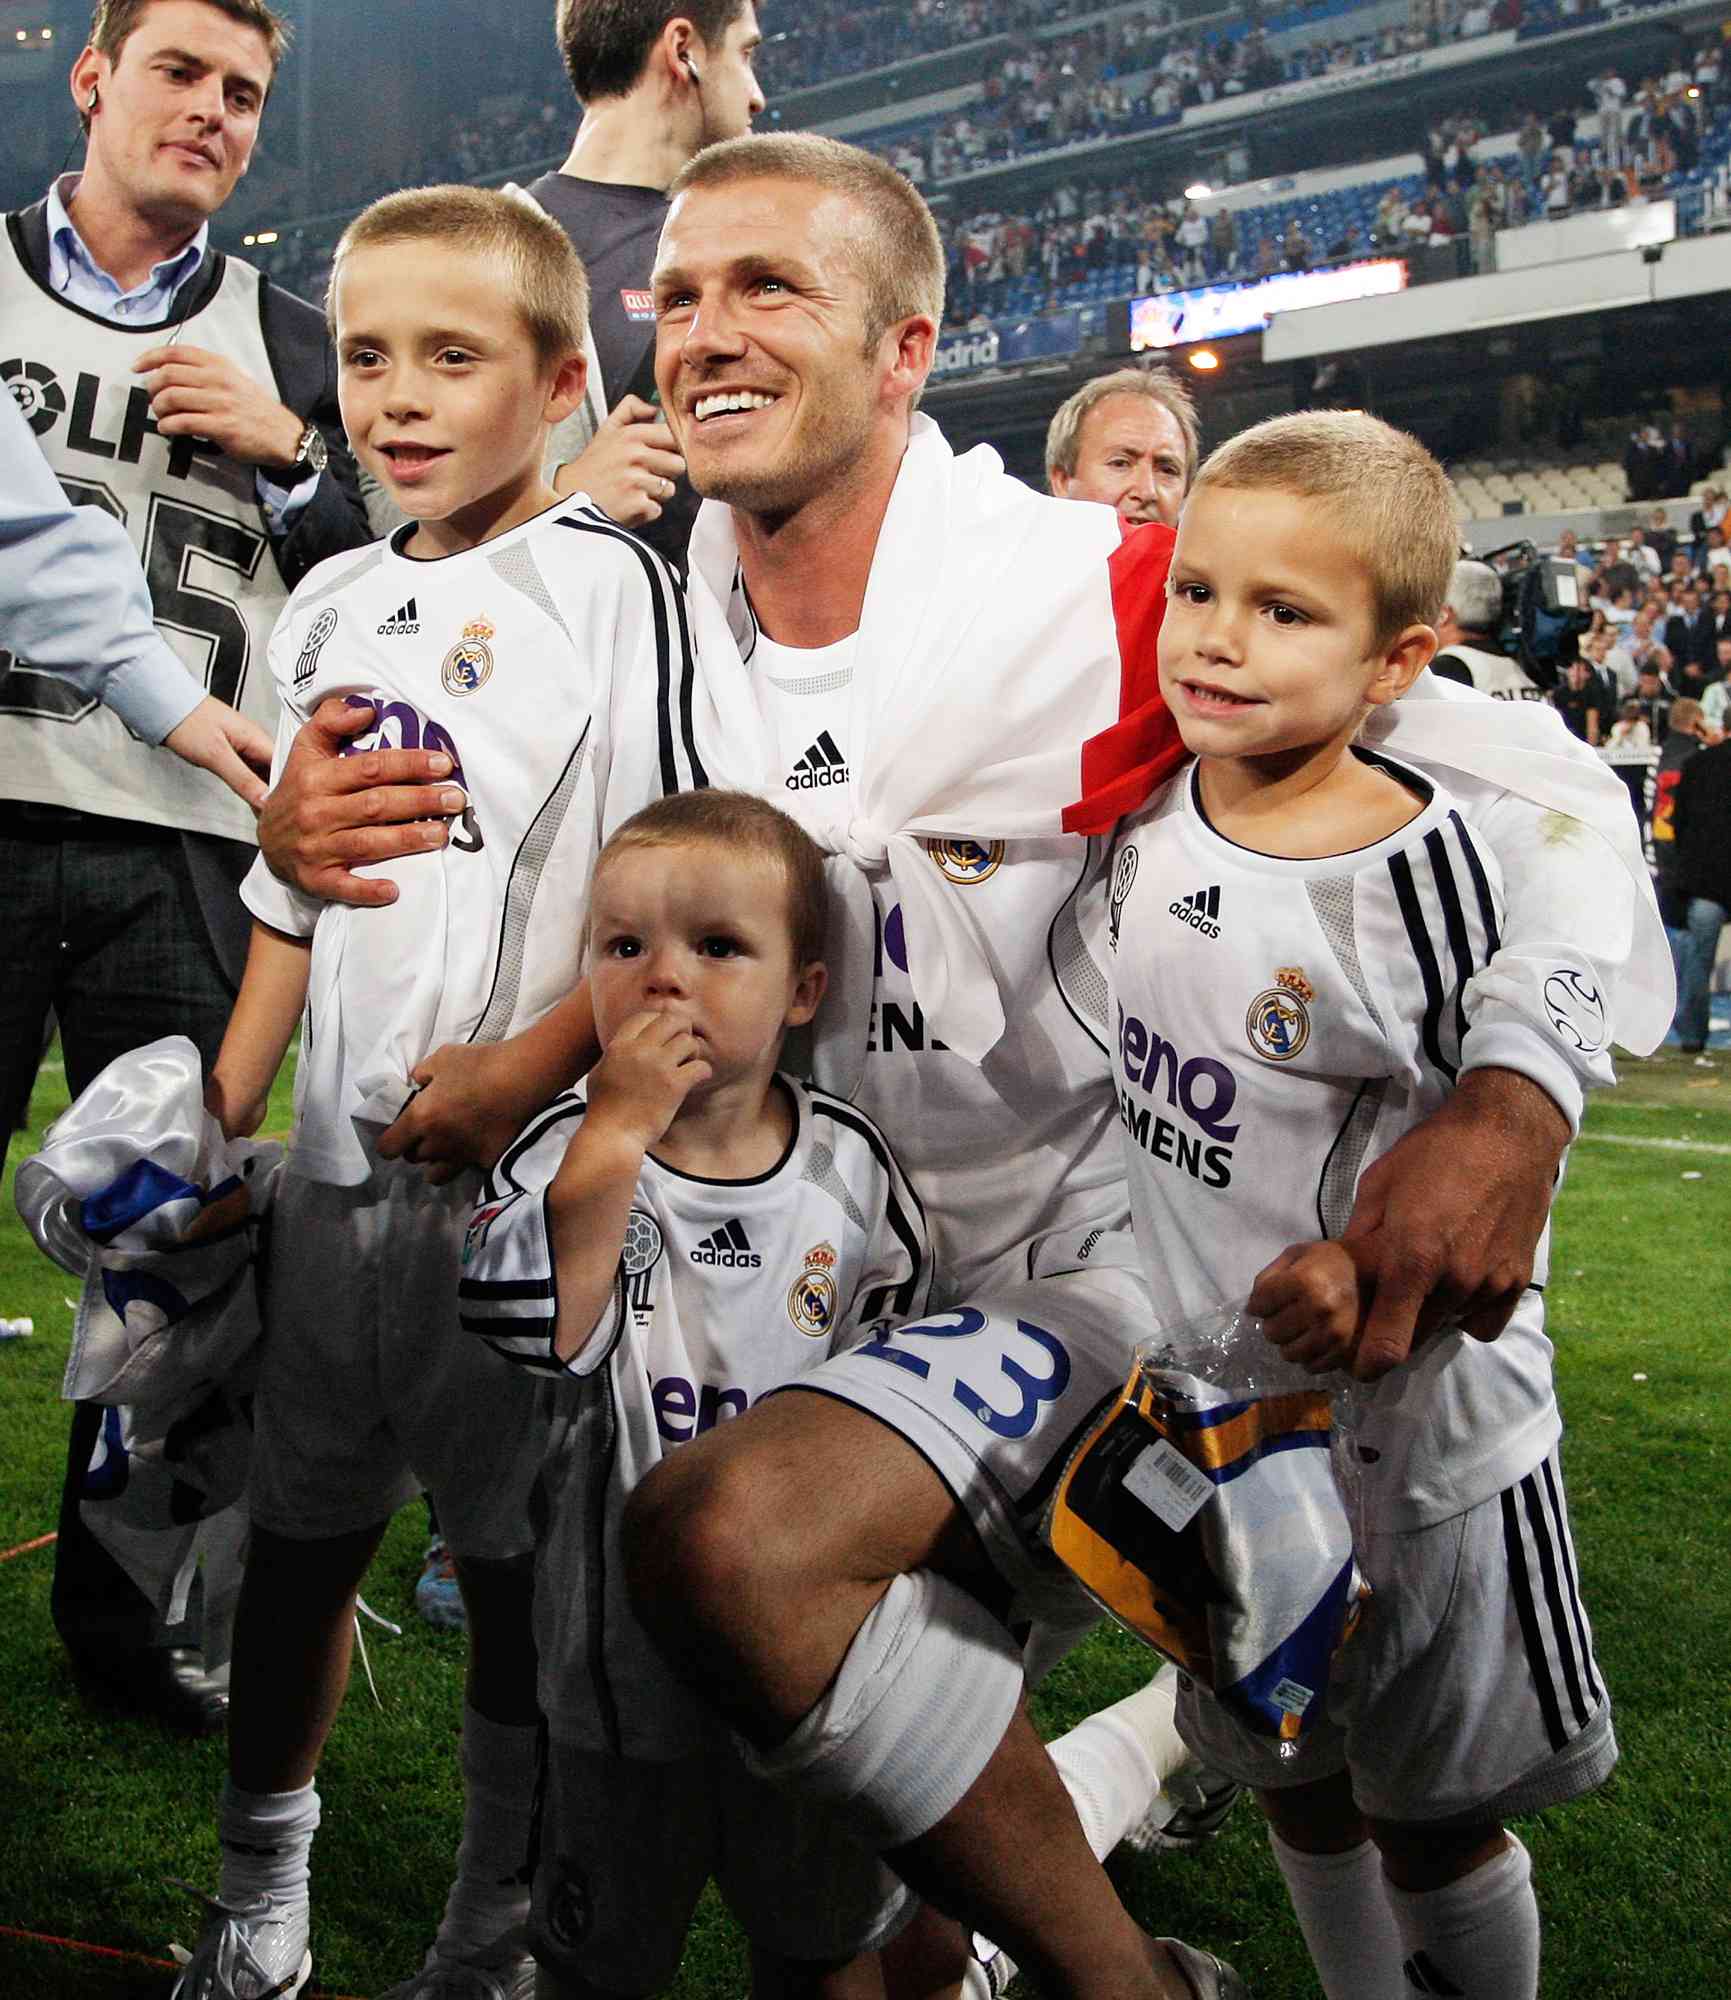 David Beckham of Real Madrid celebrates with his children Brooklyn, Cruz and Romeo after Real won the Primera Liga title after the match between Real Madrid and Mallorca at the Santiago Bernabeu stadium on June 17, 2007 in Madrid, Spain